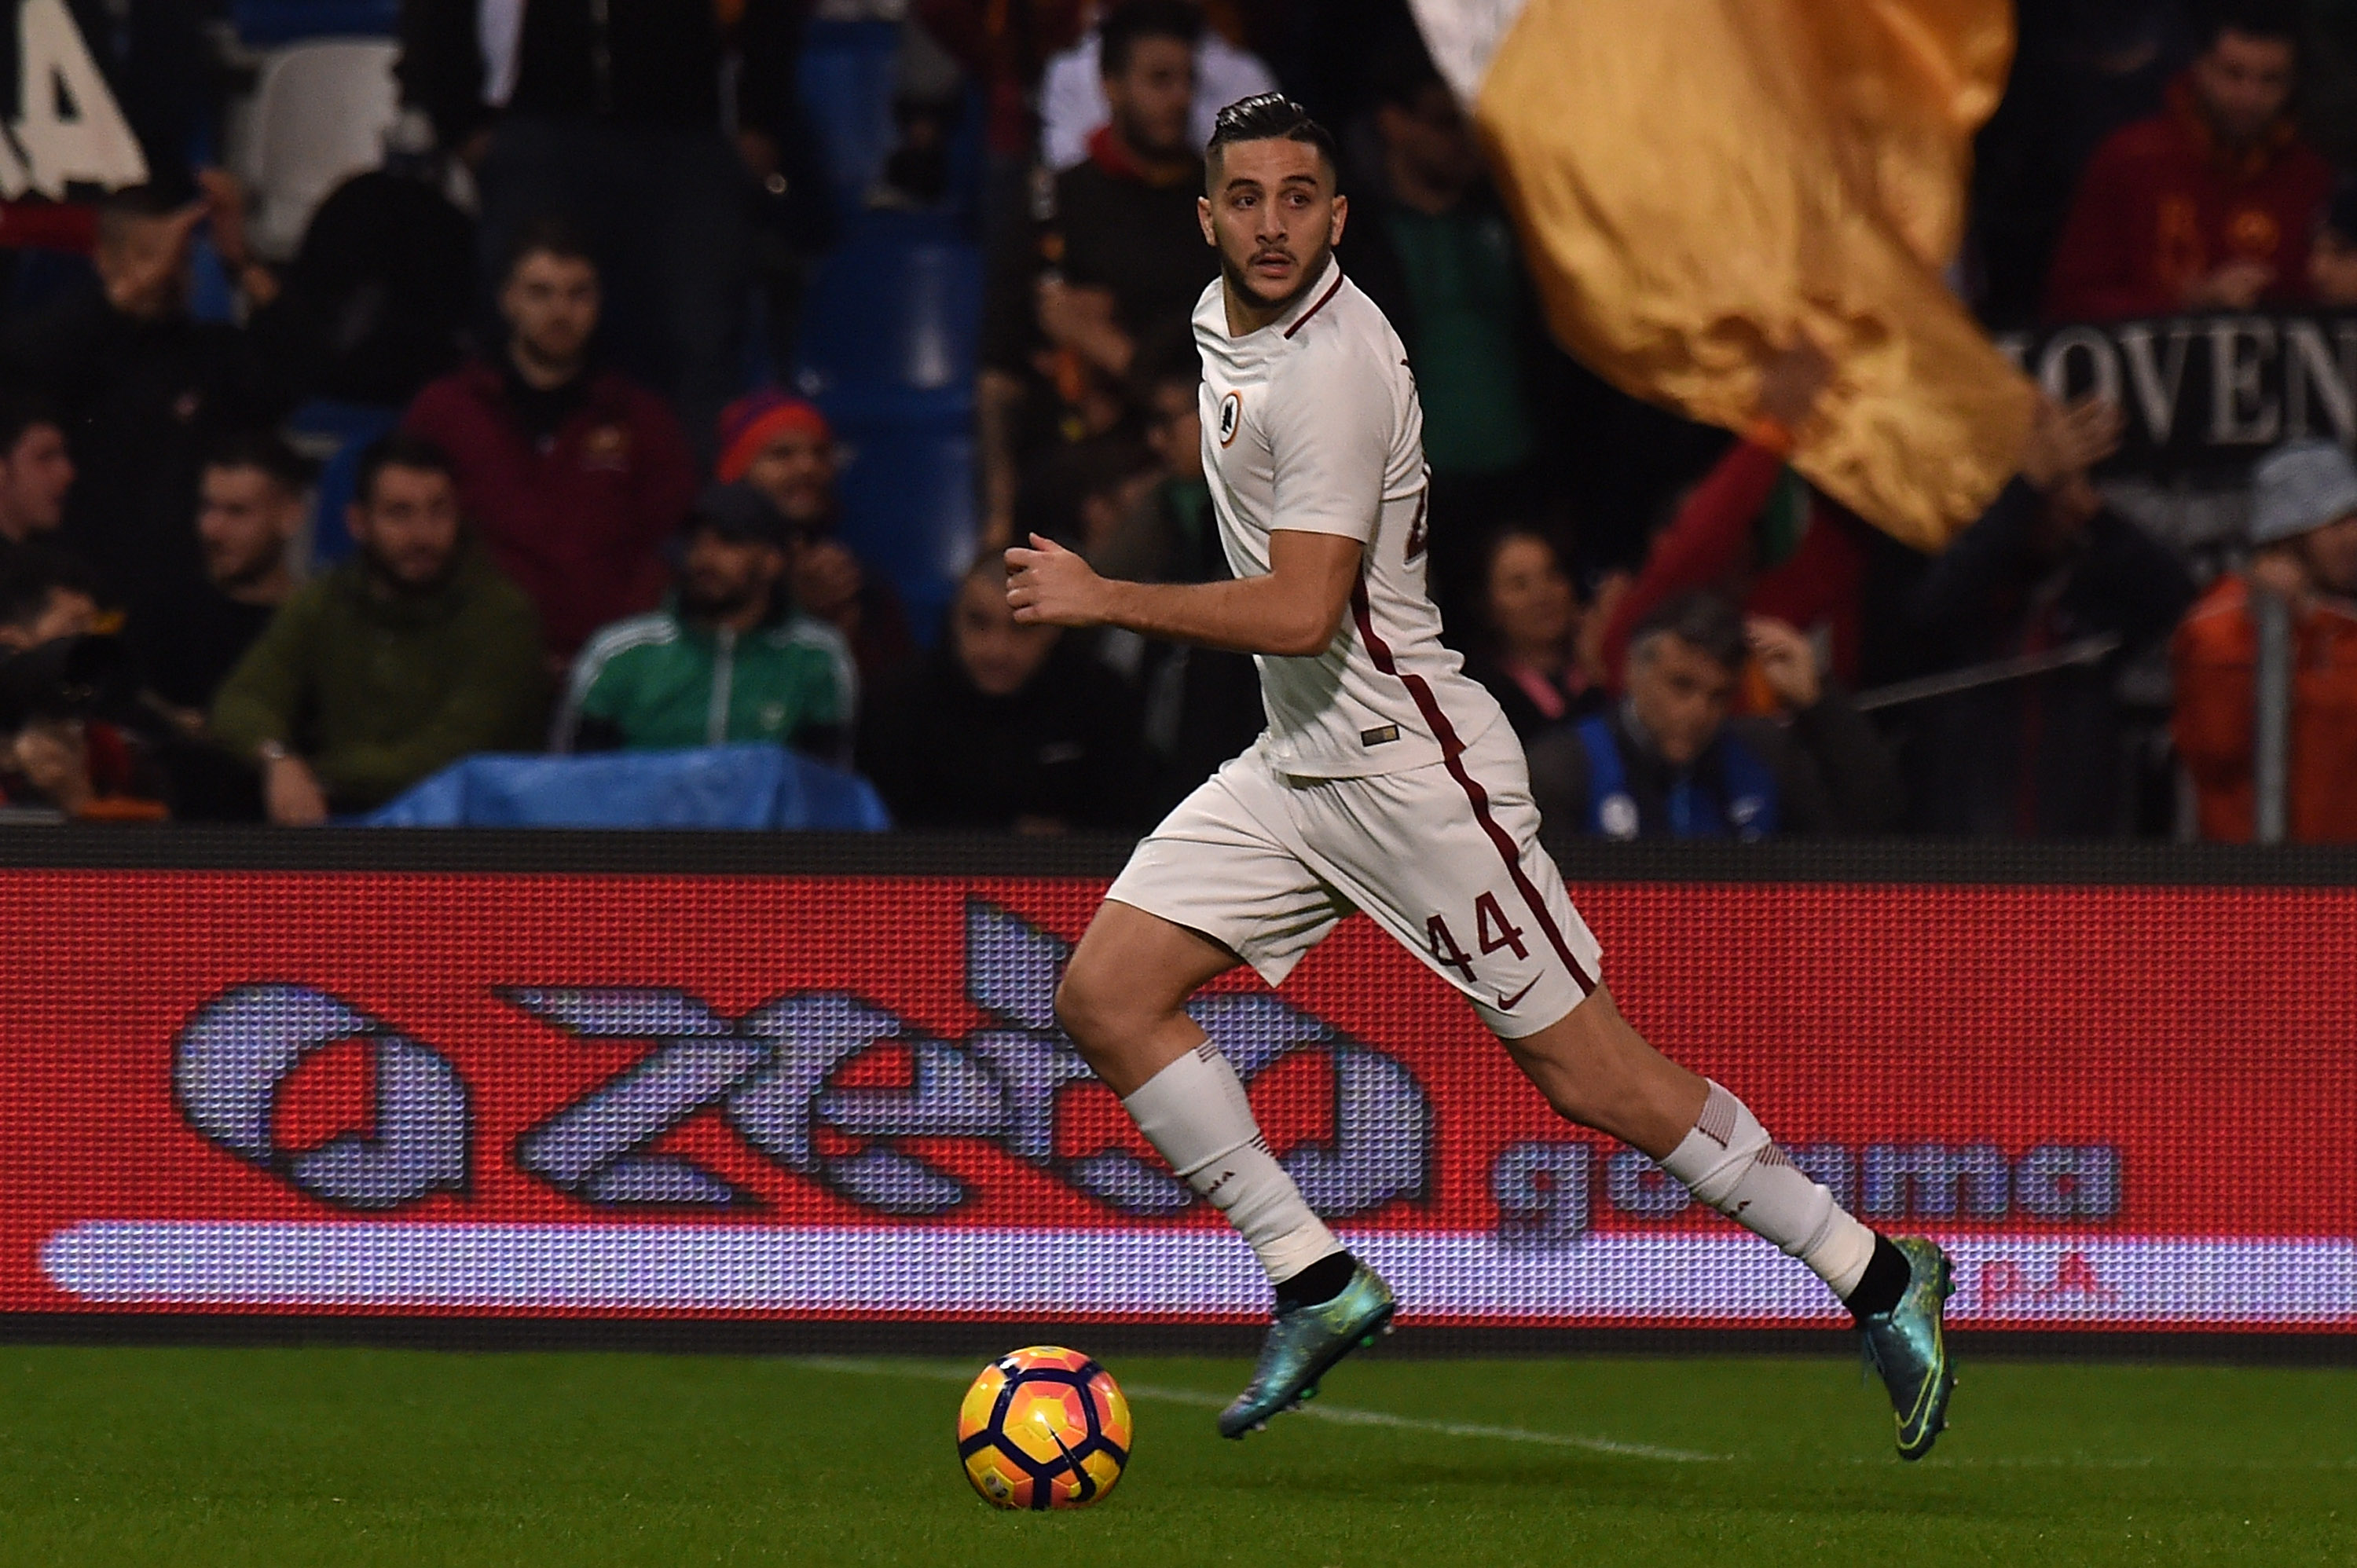 REGGIO NELL'EMILIA, ITALY - OCTOBER 26: Kostas Manolas of Roma in action during the Serie A match between US Sassuolo and AS Roma at Mapei Stadium - Citta' del Tricolore on October 26, 2016 in Reggio nell'Emilia, Italy. (Photo by Tullio M. Puglia/Getty Images)